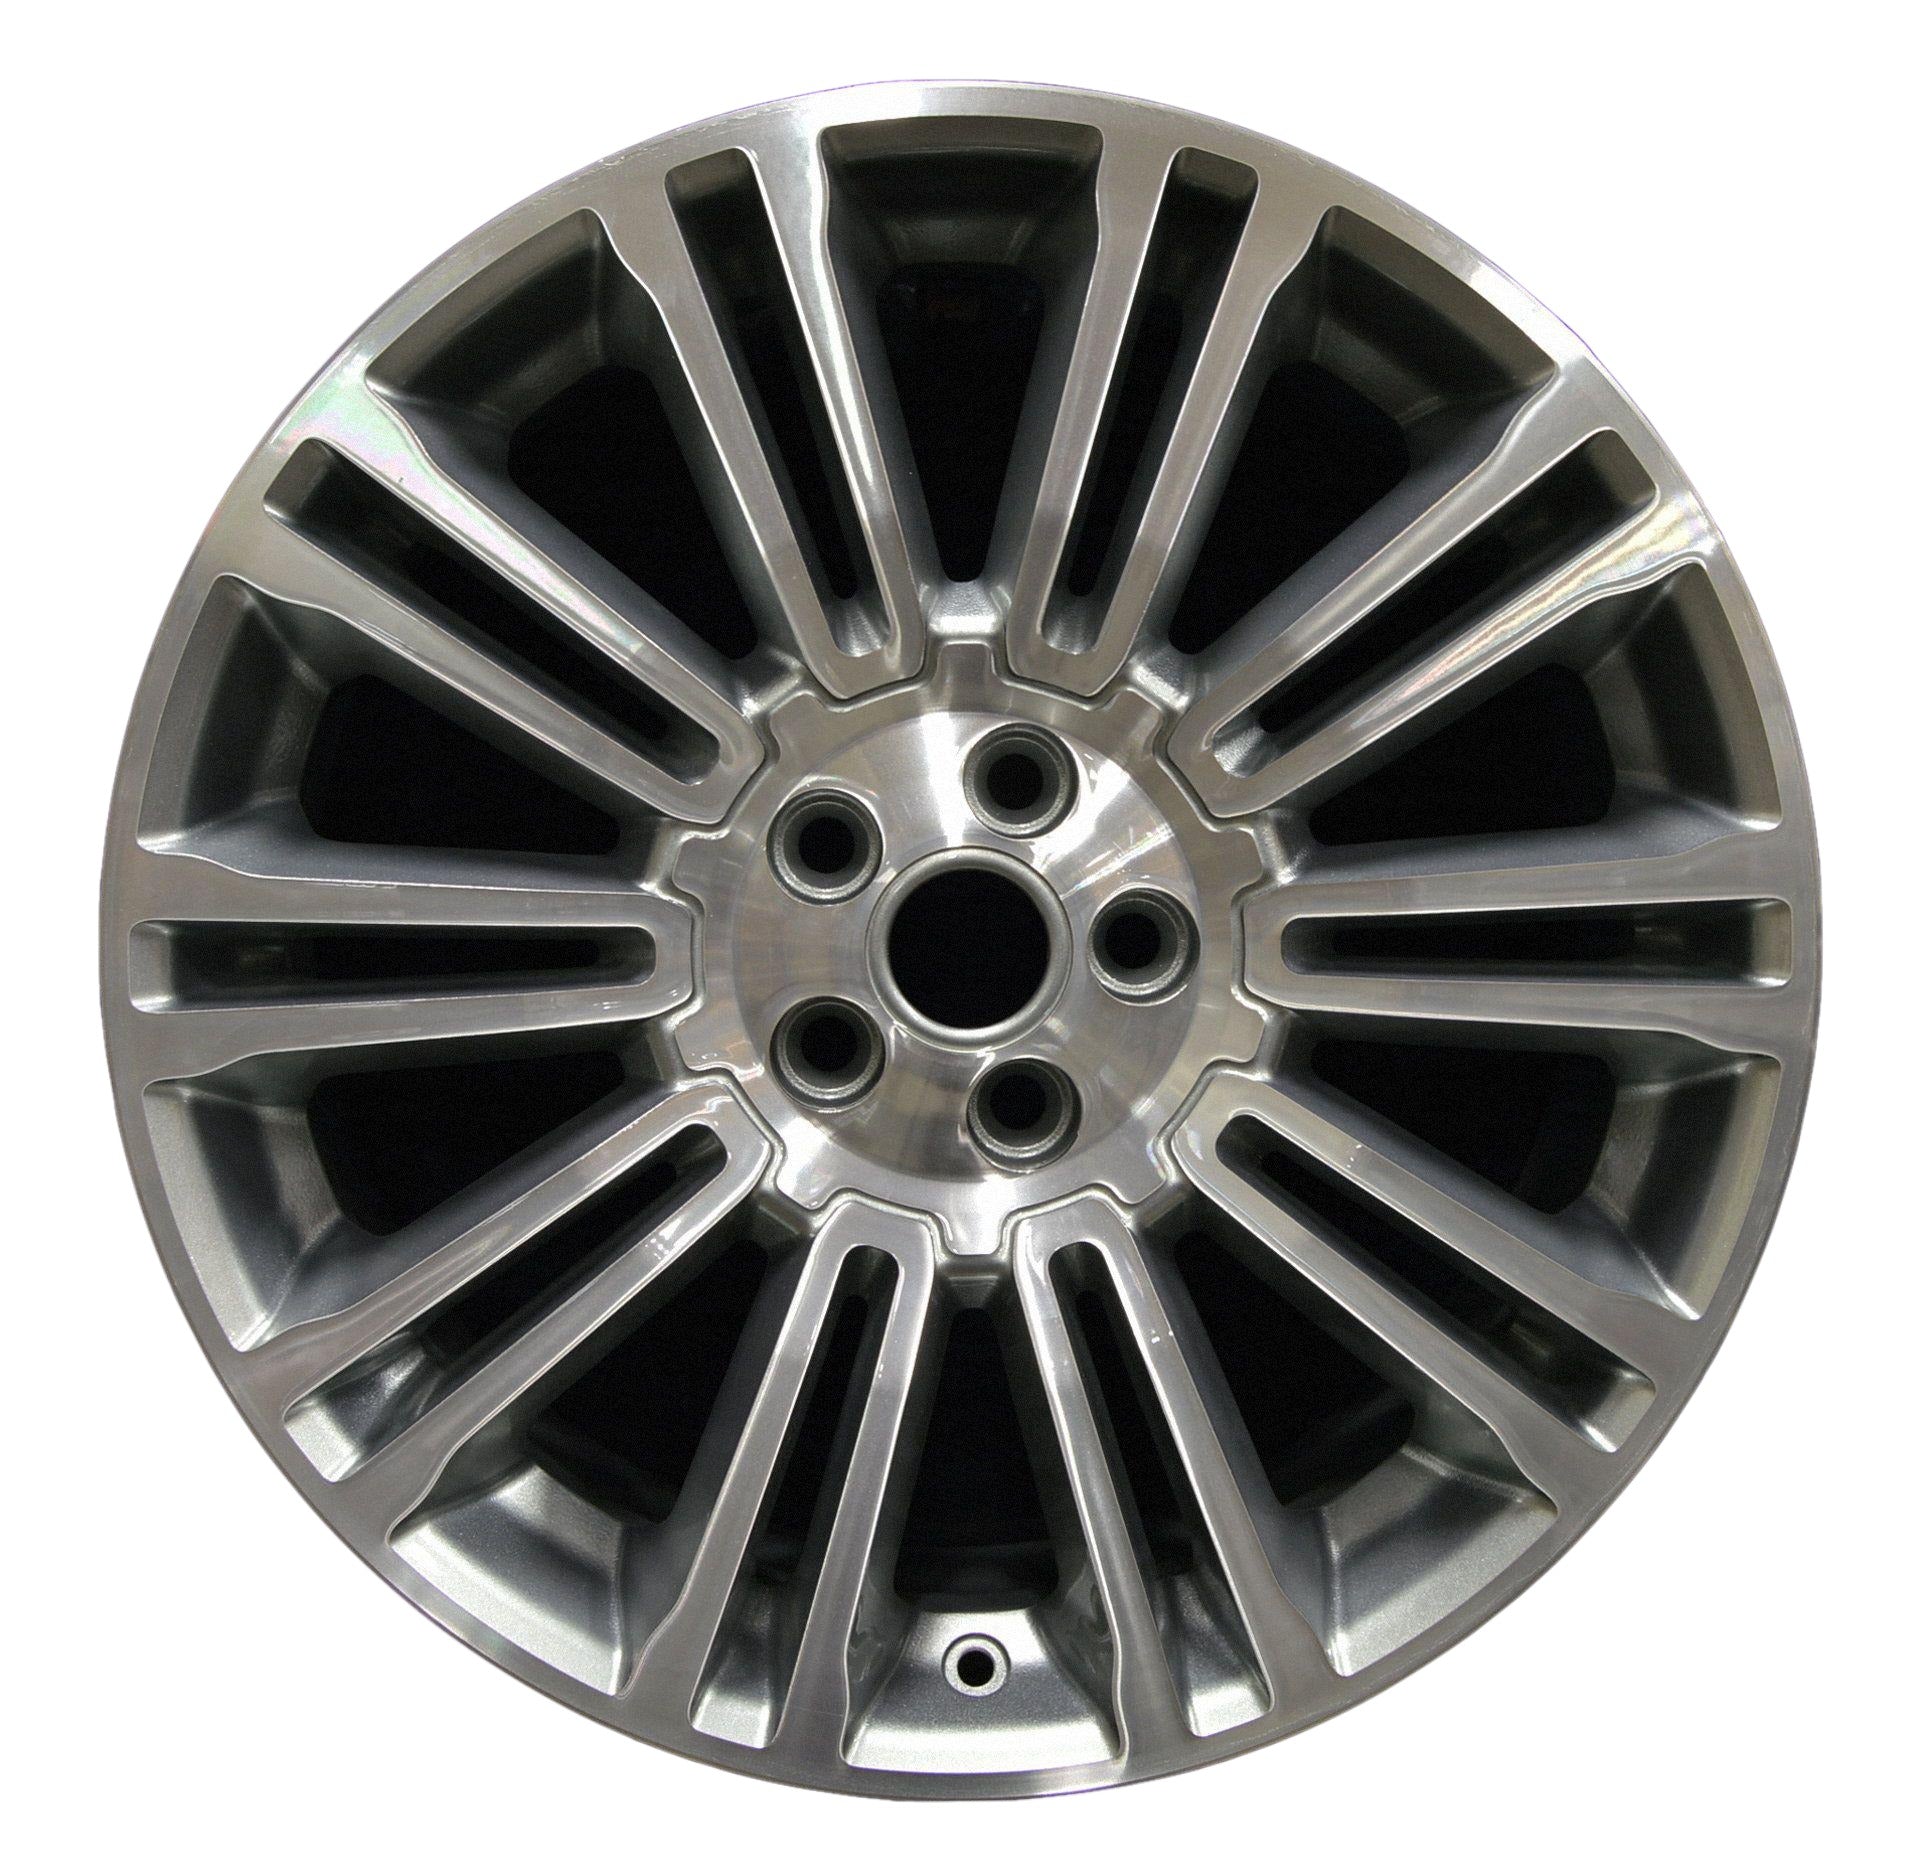 Land Rover Evoque  2012, 2013, 2014 Factory OEM Car Wheel Size 19x9 Alloy WAO.72233.LC82.MABRT